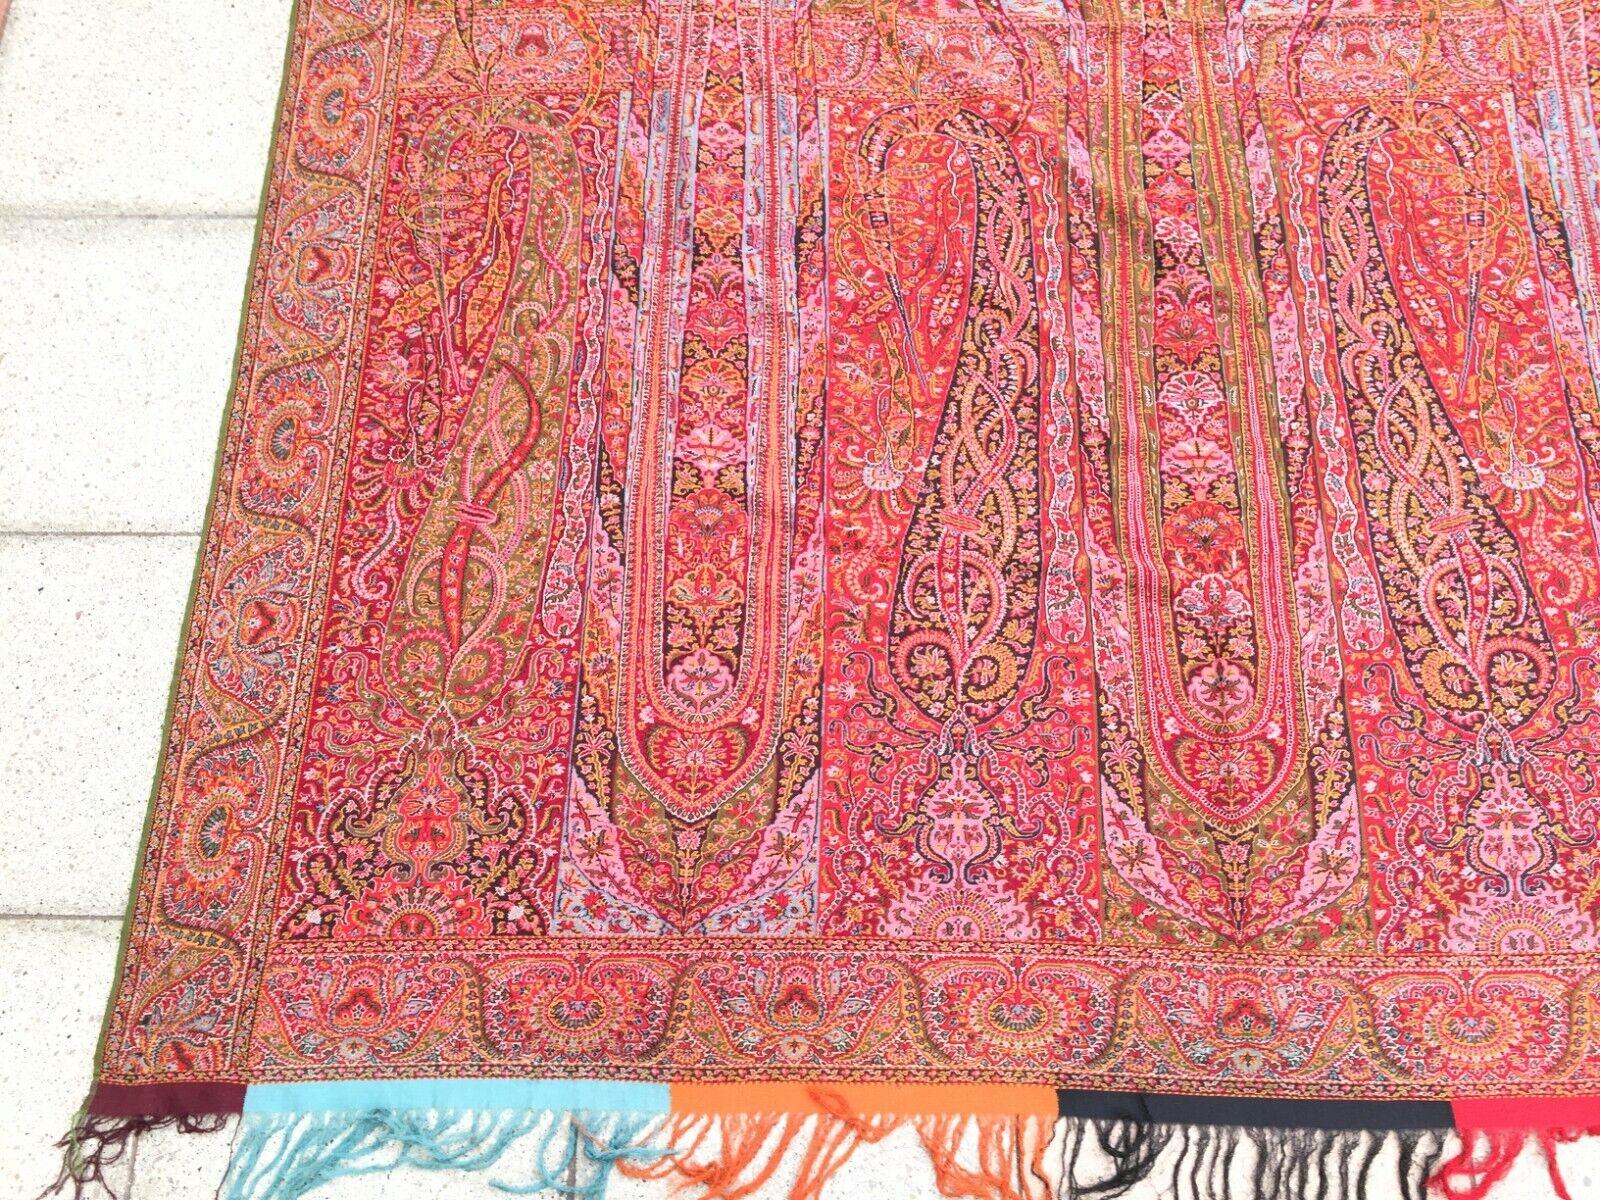 Late 19th Century Handmade Antique Indian Kashmir Shawl 5.2' x 12.4', 1870s - 1W11 For Sale